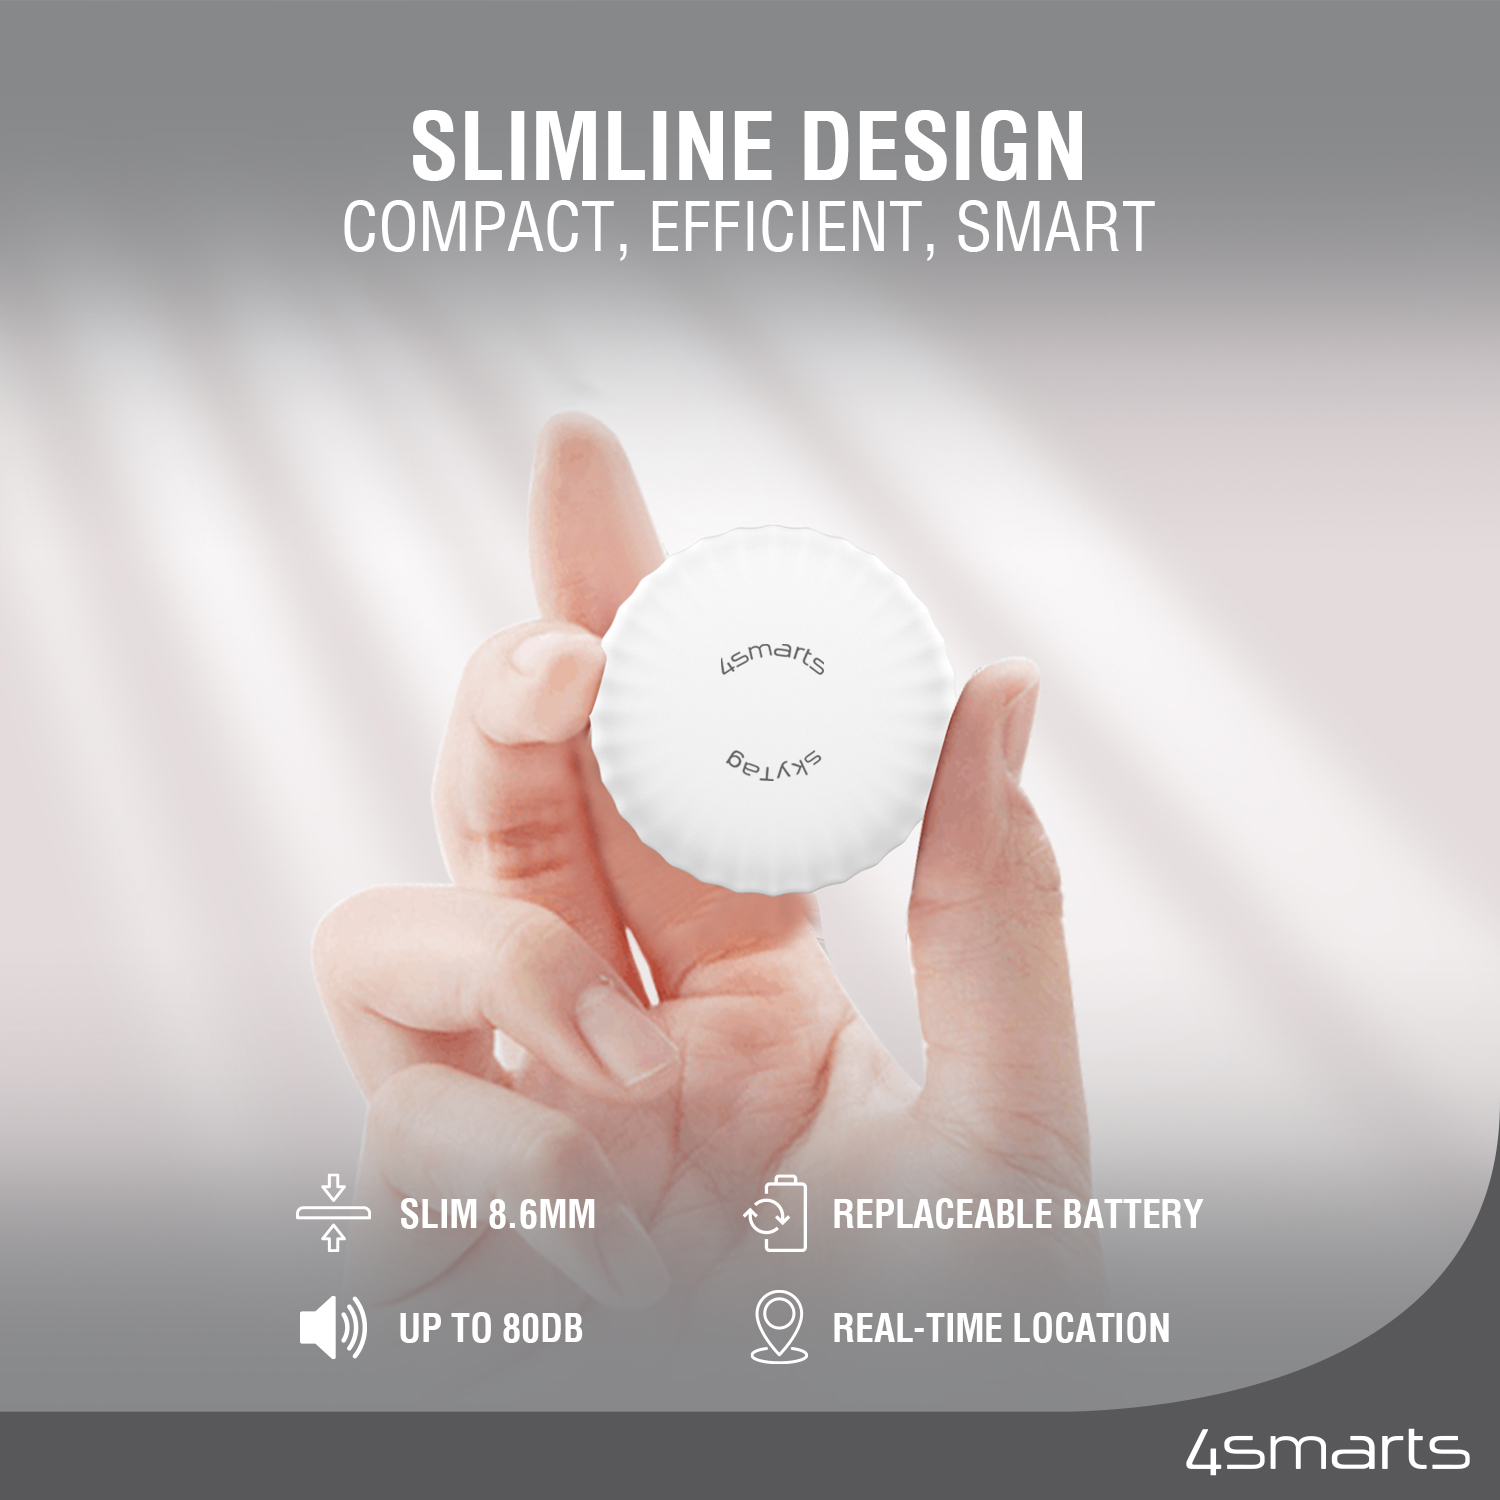 The 4smarts SkyTag Slim location finder is unobtrusive, compact, efficient, smart and flat.